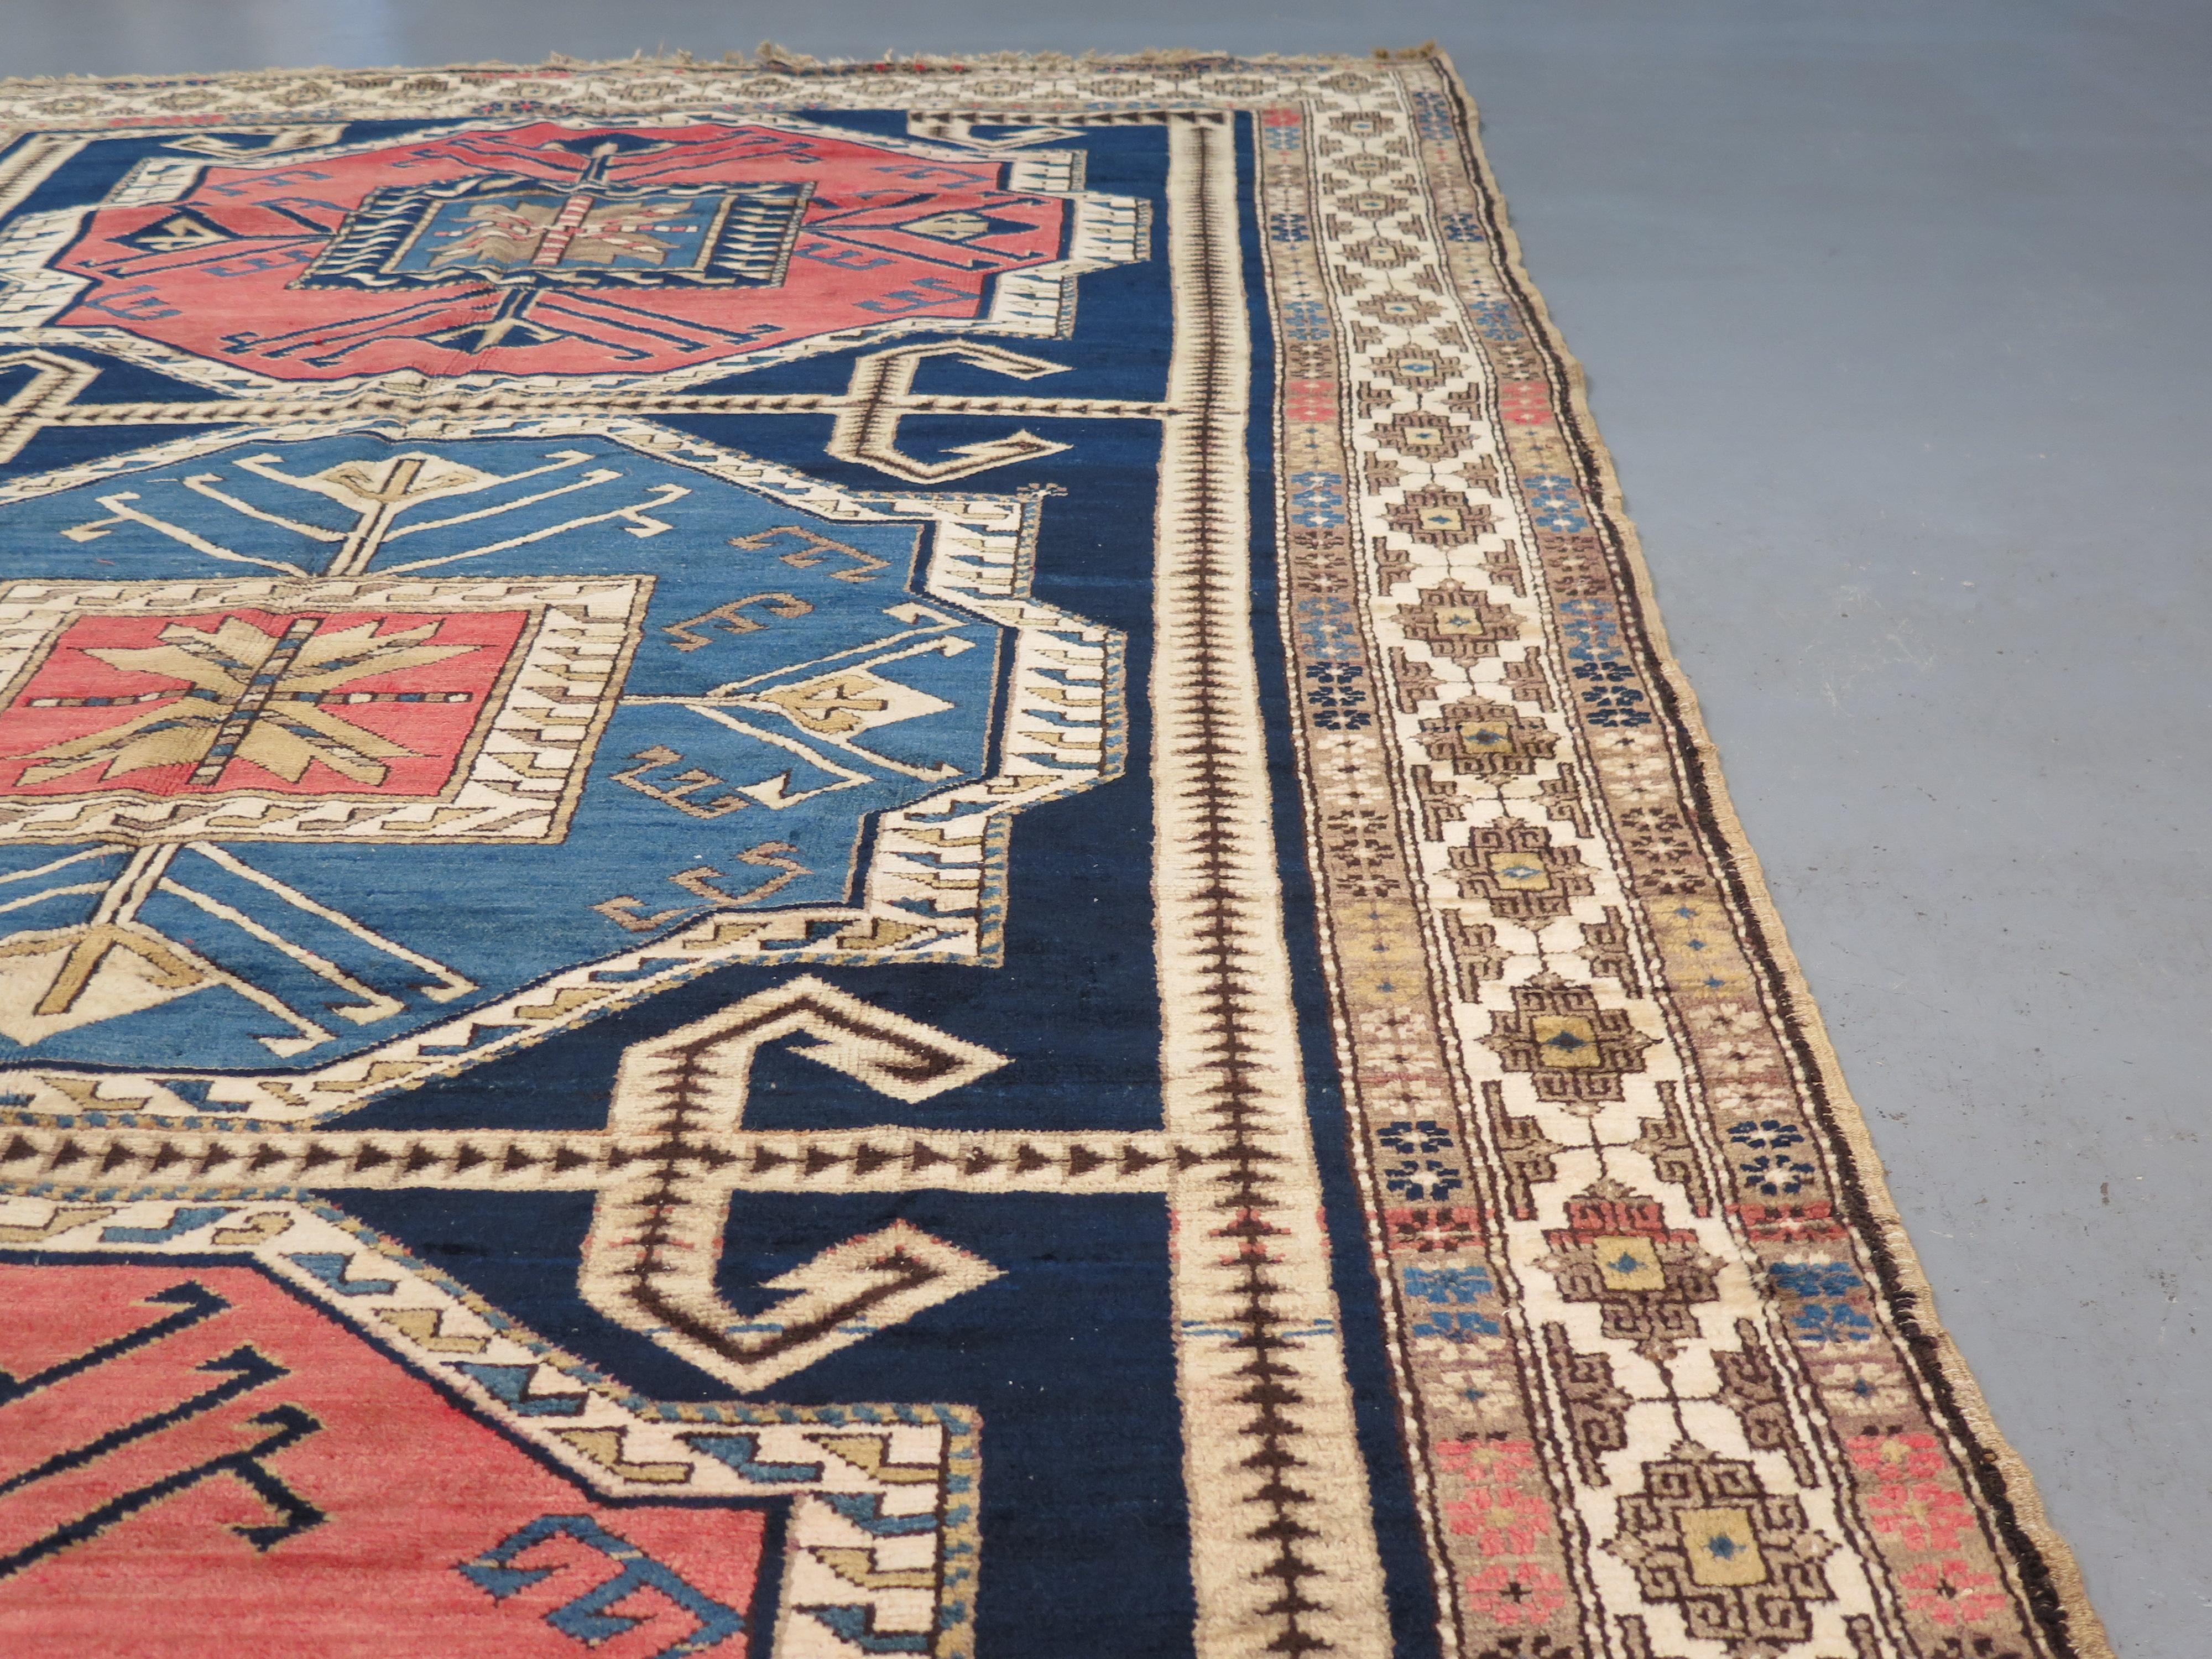 The Caucasus have a rich history of rug weaving, stretching back several centuries. The region stands at the crossroads of various cultures, and its carpets reflect this in their creativity and diversity. As such, these pieces are highly